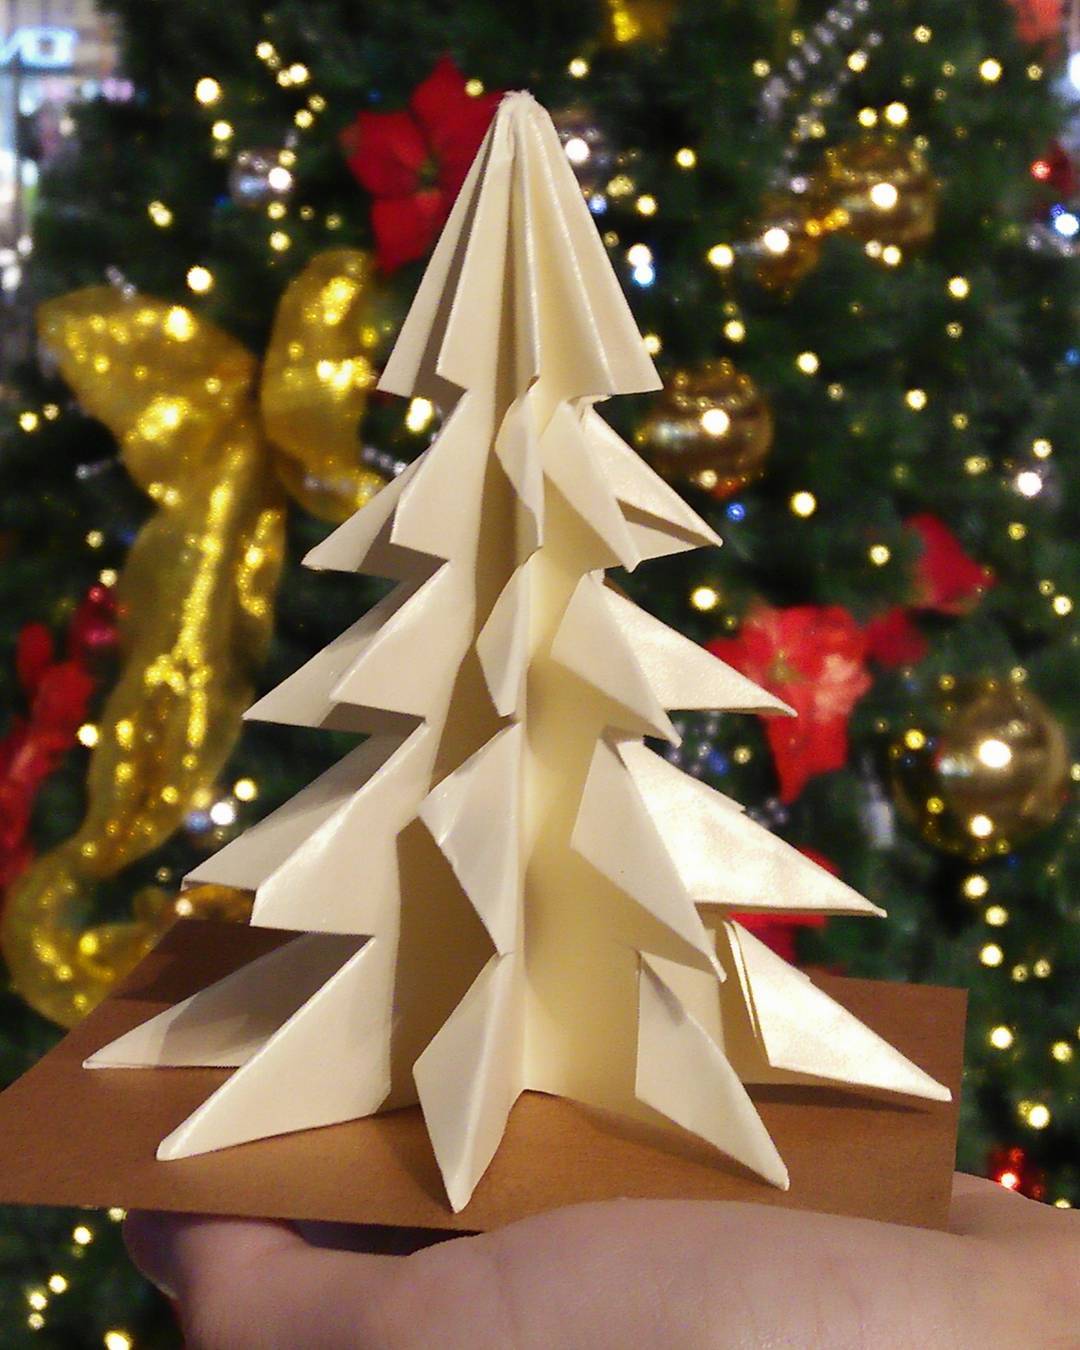 Christmas is a wonderful time to make origami models to decorate your Christmas tree.